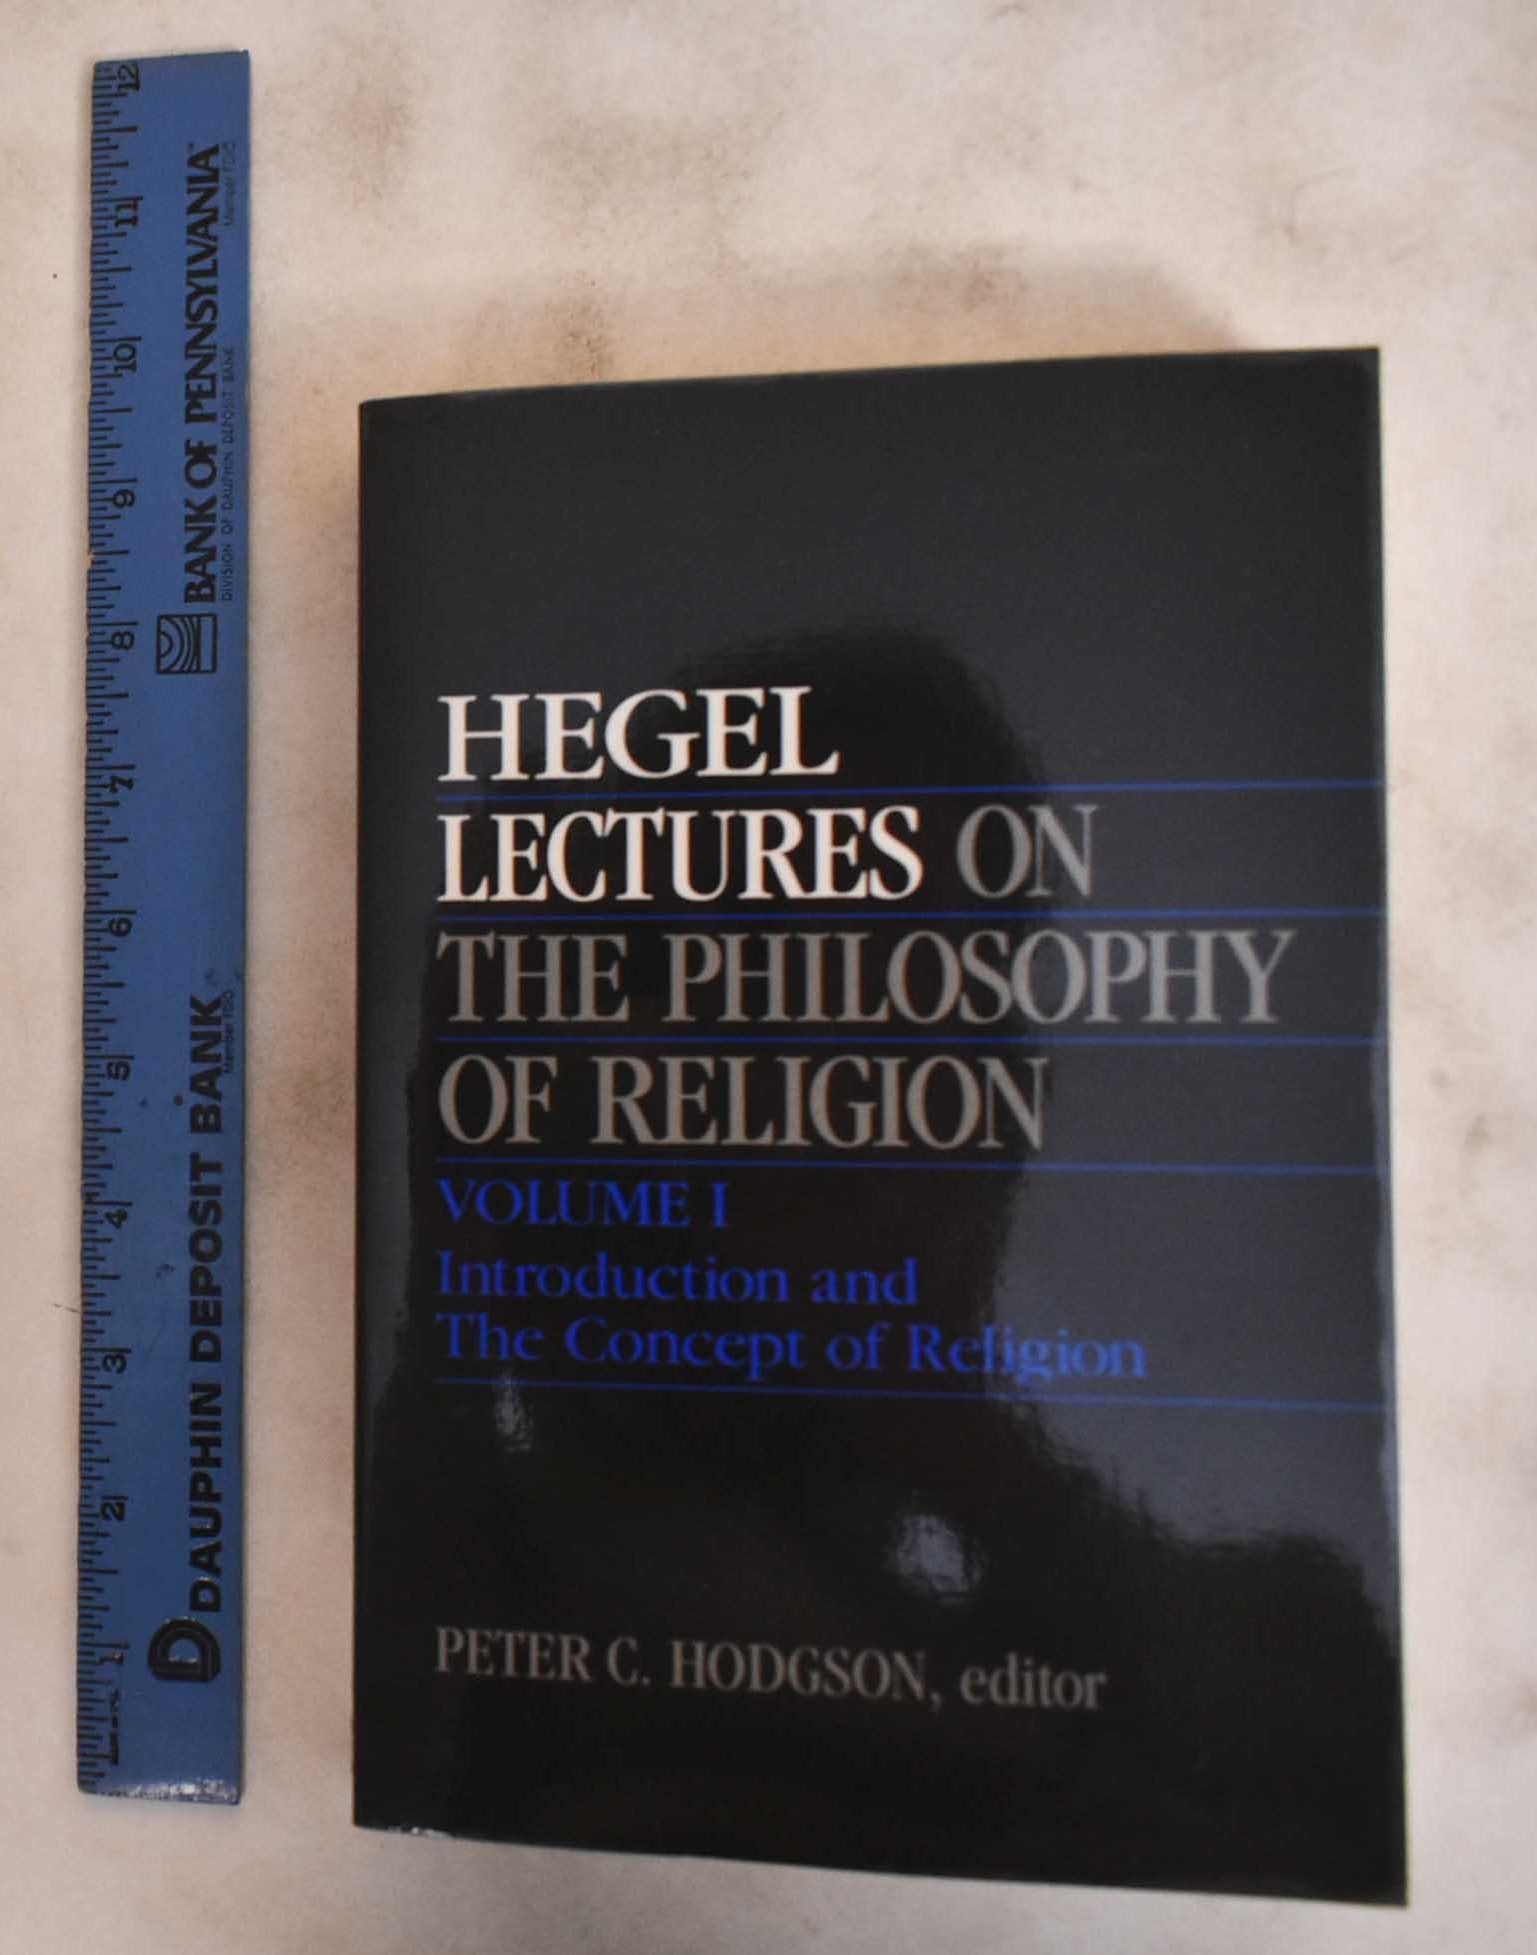 Lectures on the Philosphy of Religion, Three volume set | Georg 